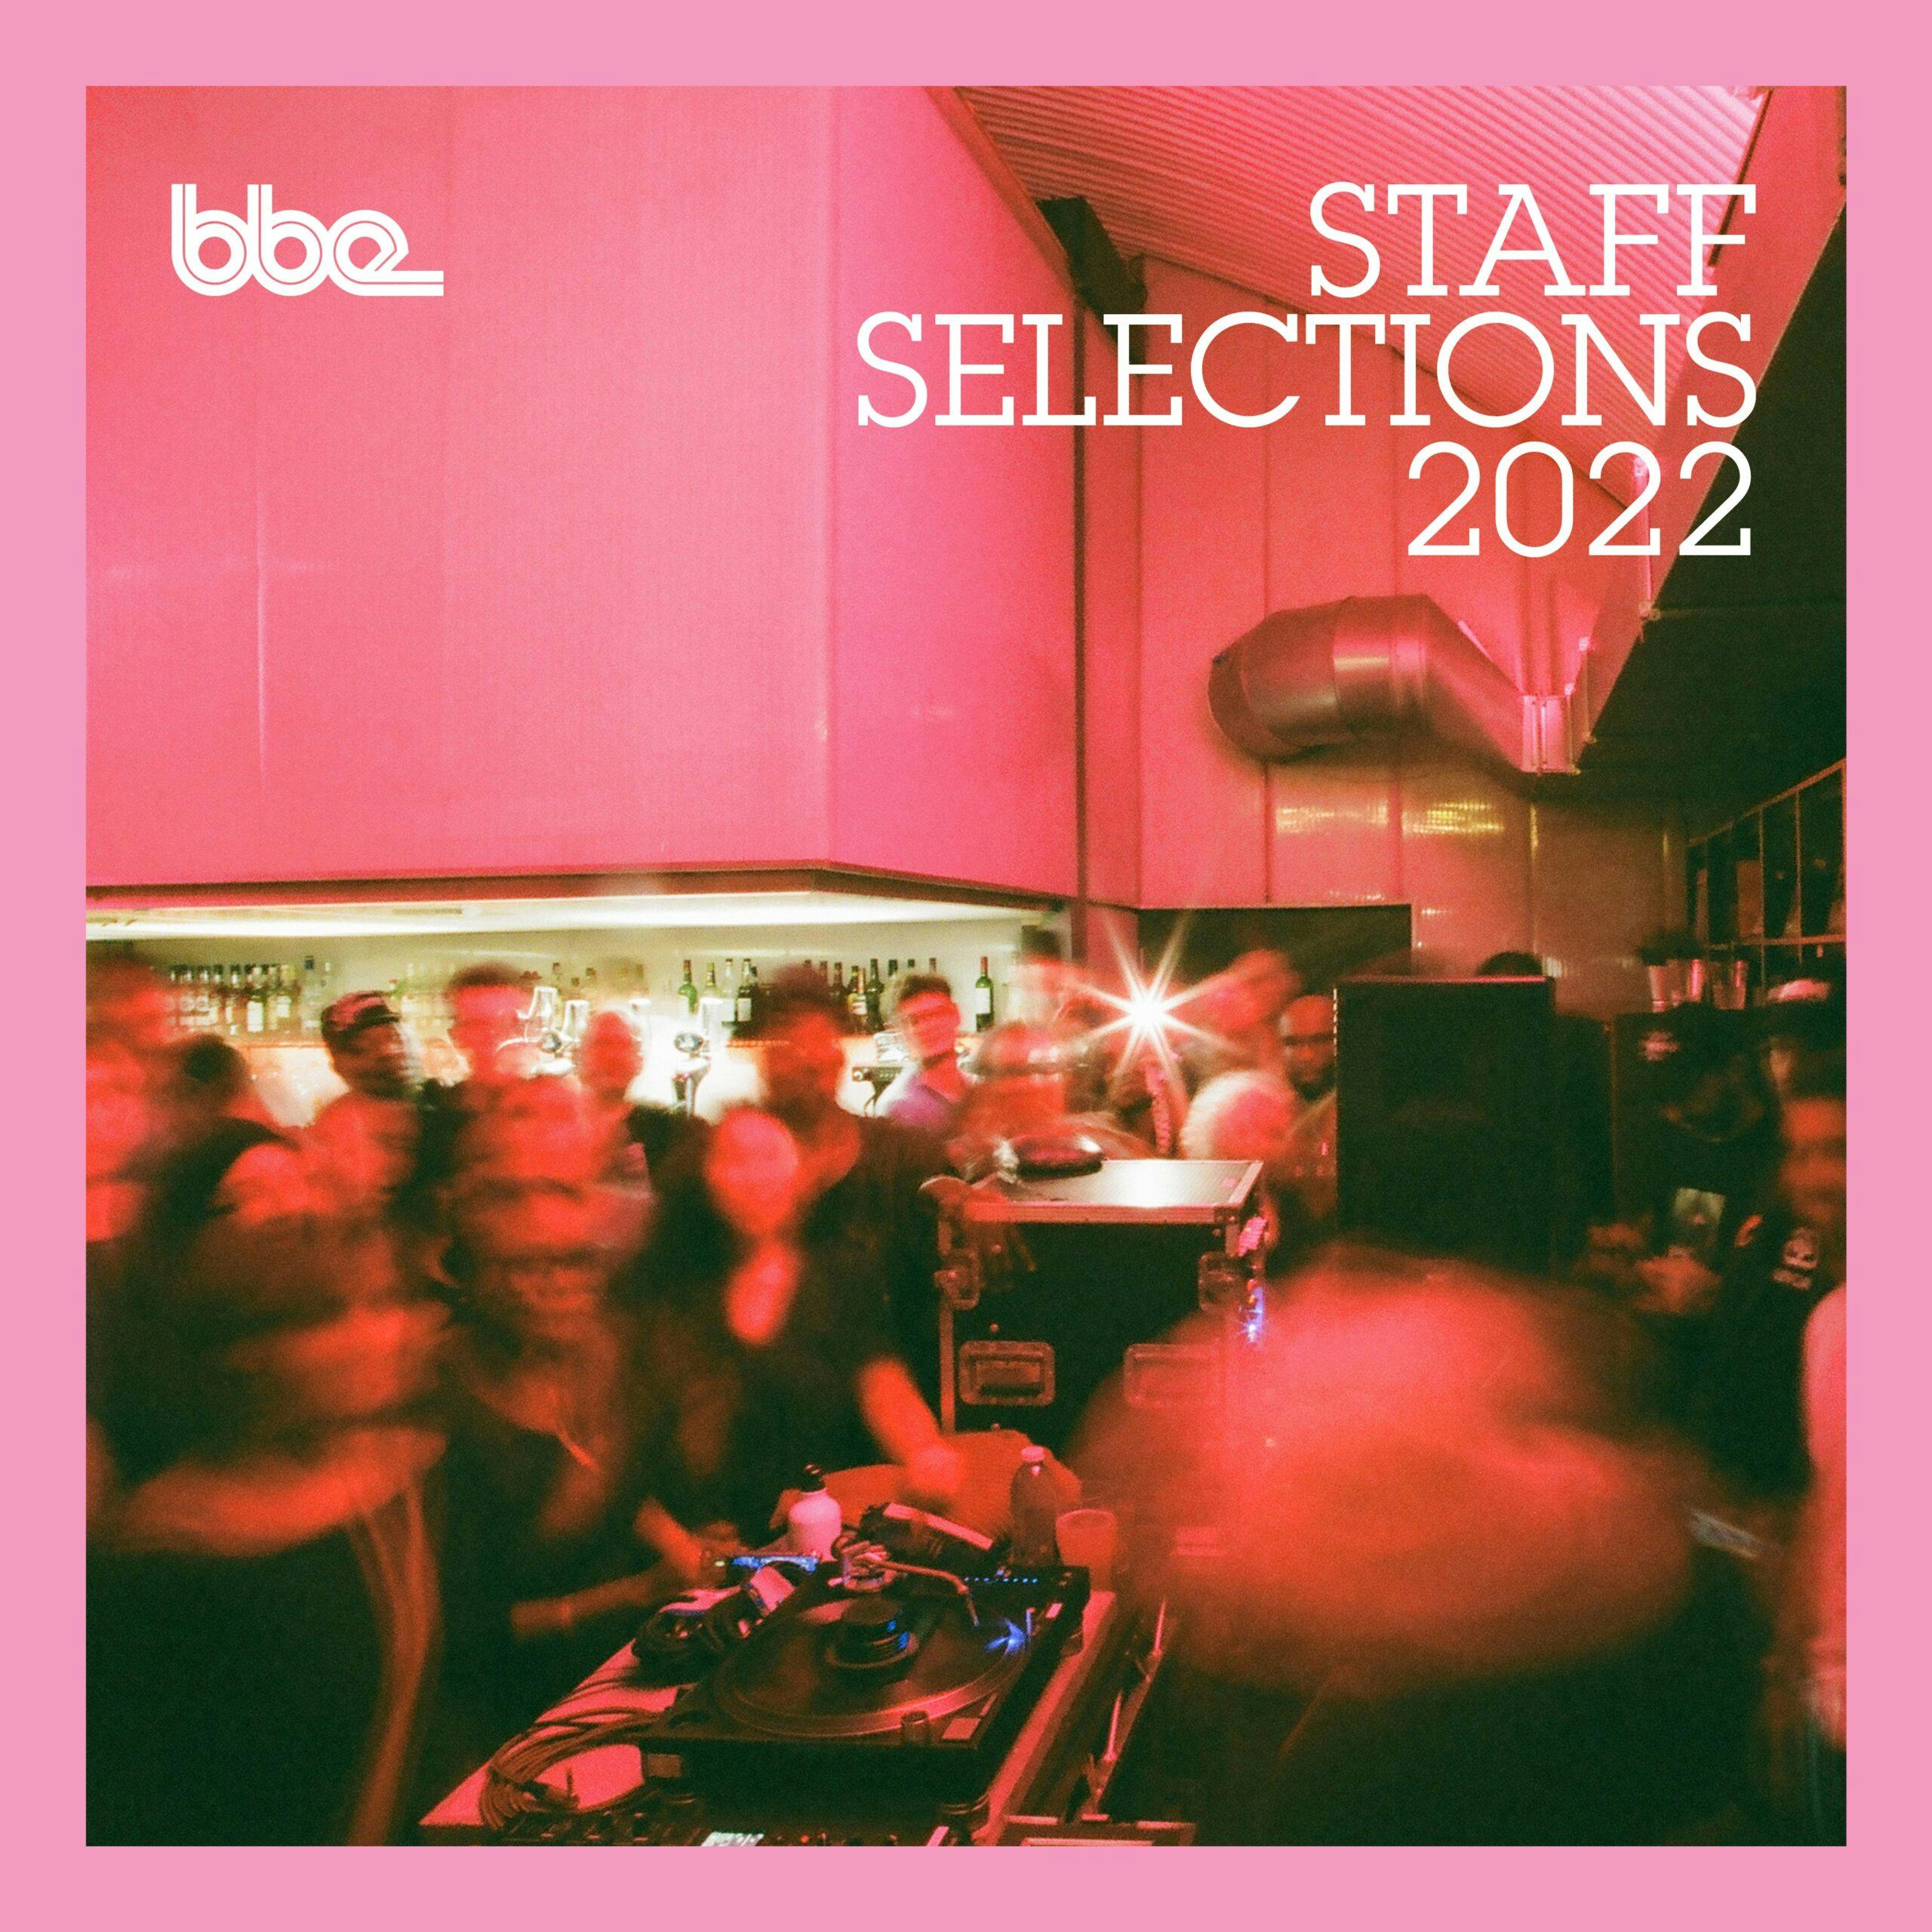 Our Staff Selections are carefully curated highlights of our favourite tracks from the year.